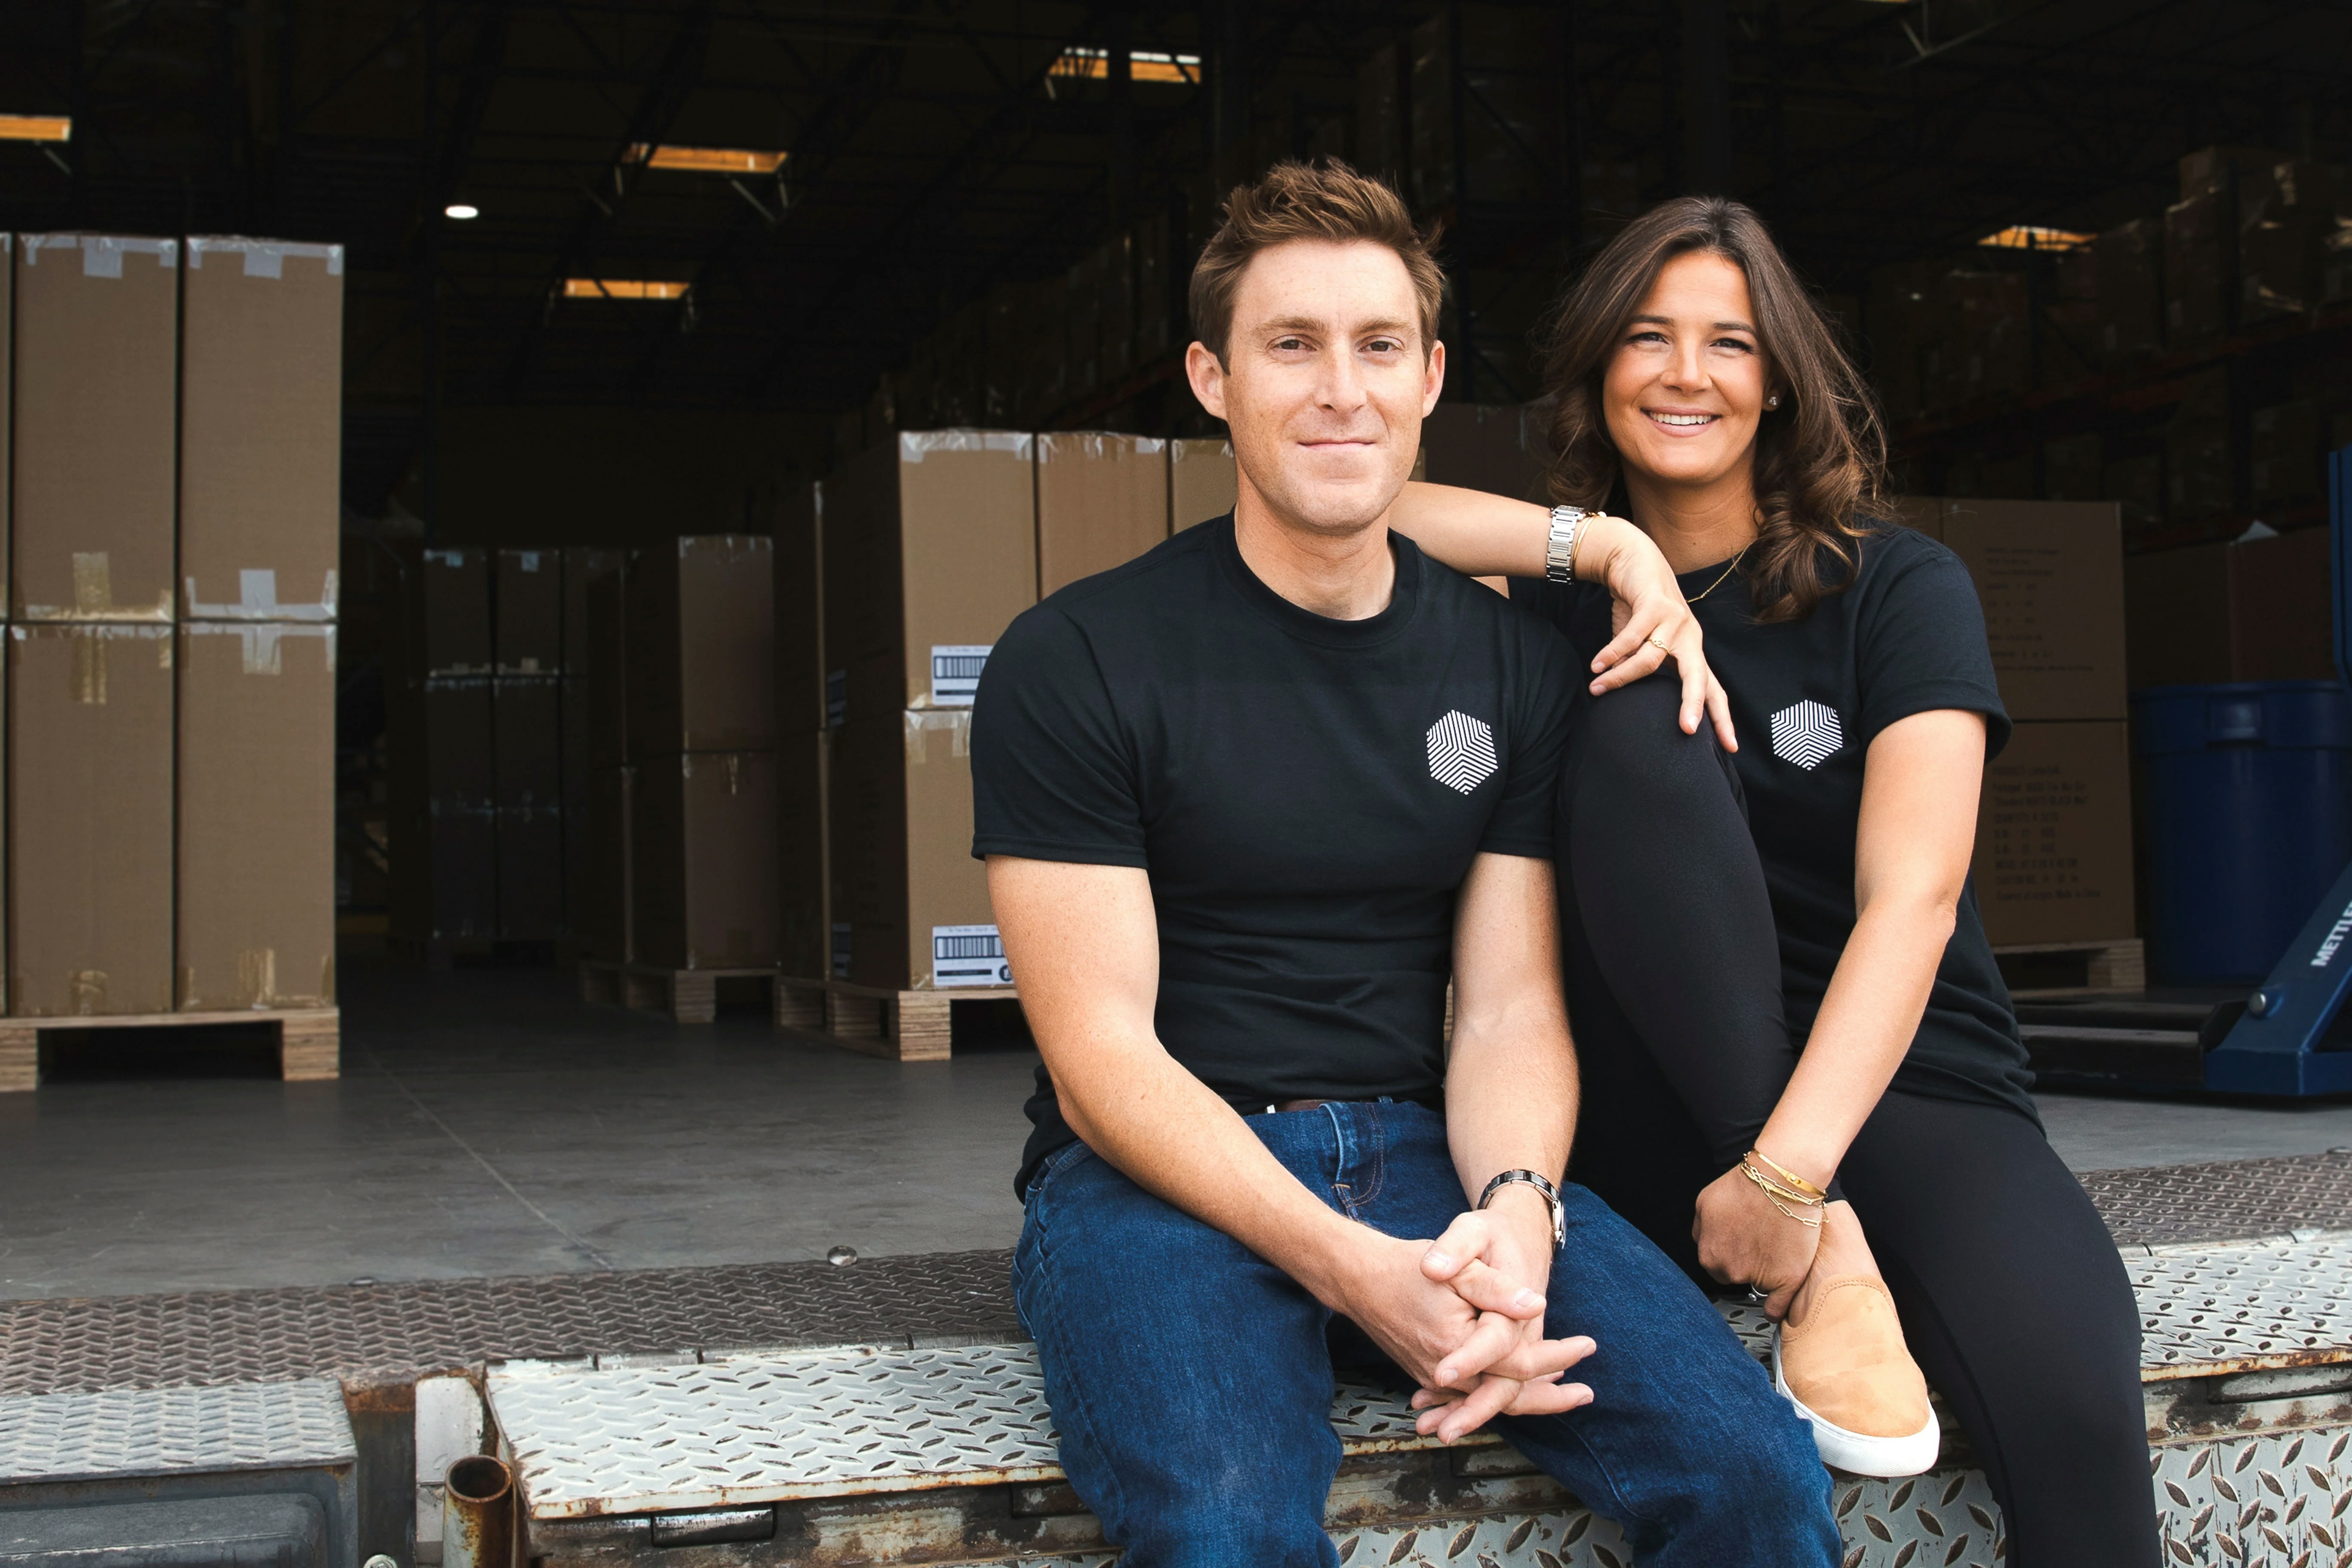 The founders of Mvnifest, Samantha Rose and Brian Rose, are pictured at the Mvnifest Fulfillment Center in Las Vegas, Nevada.